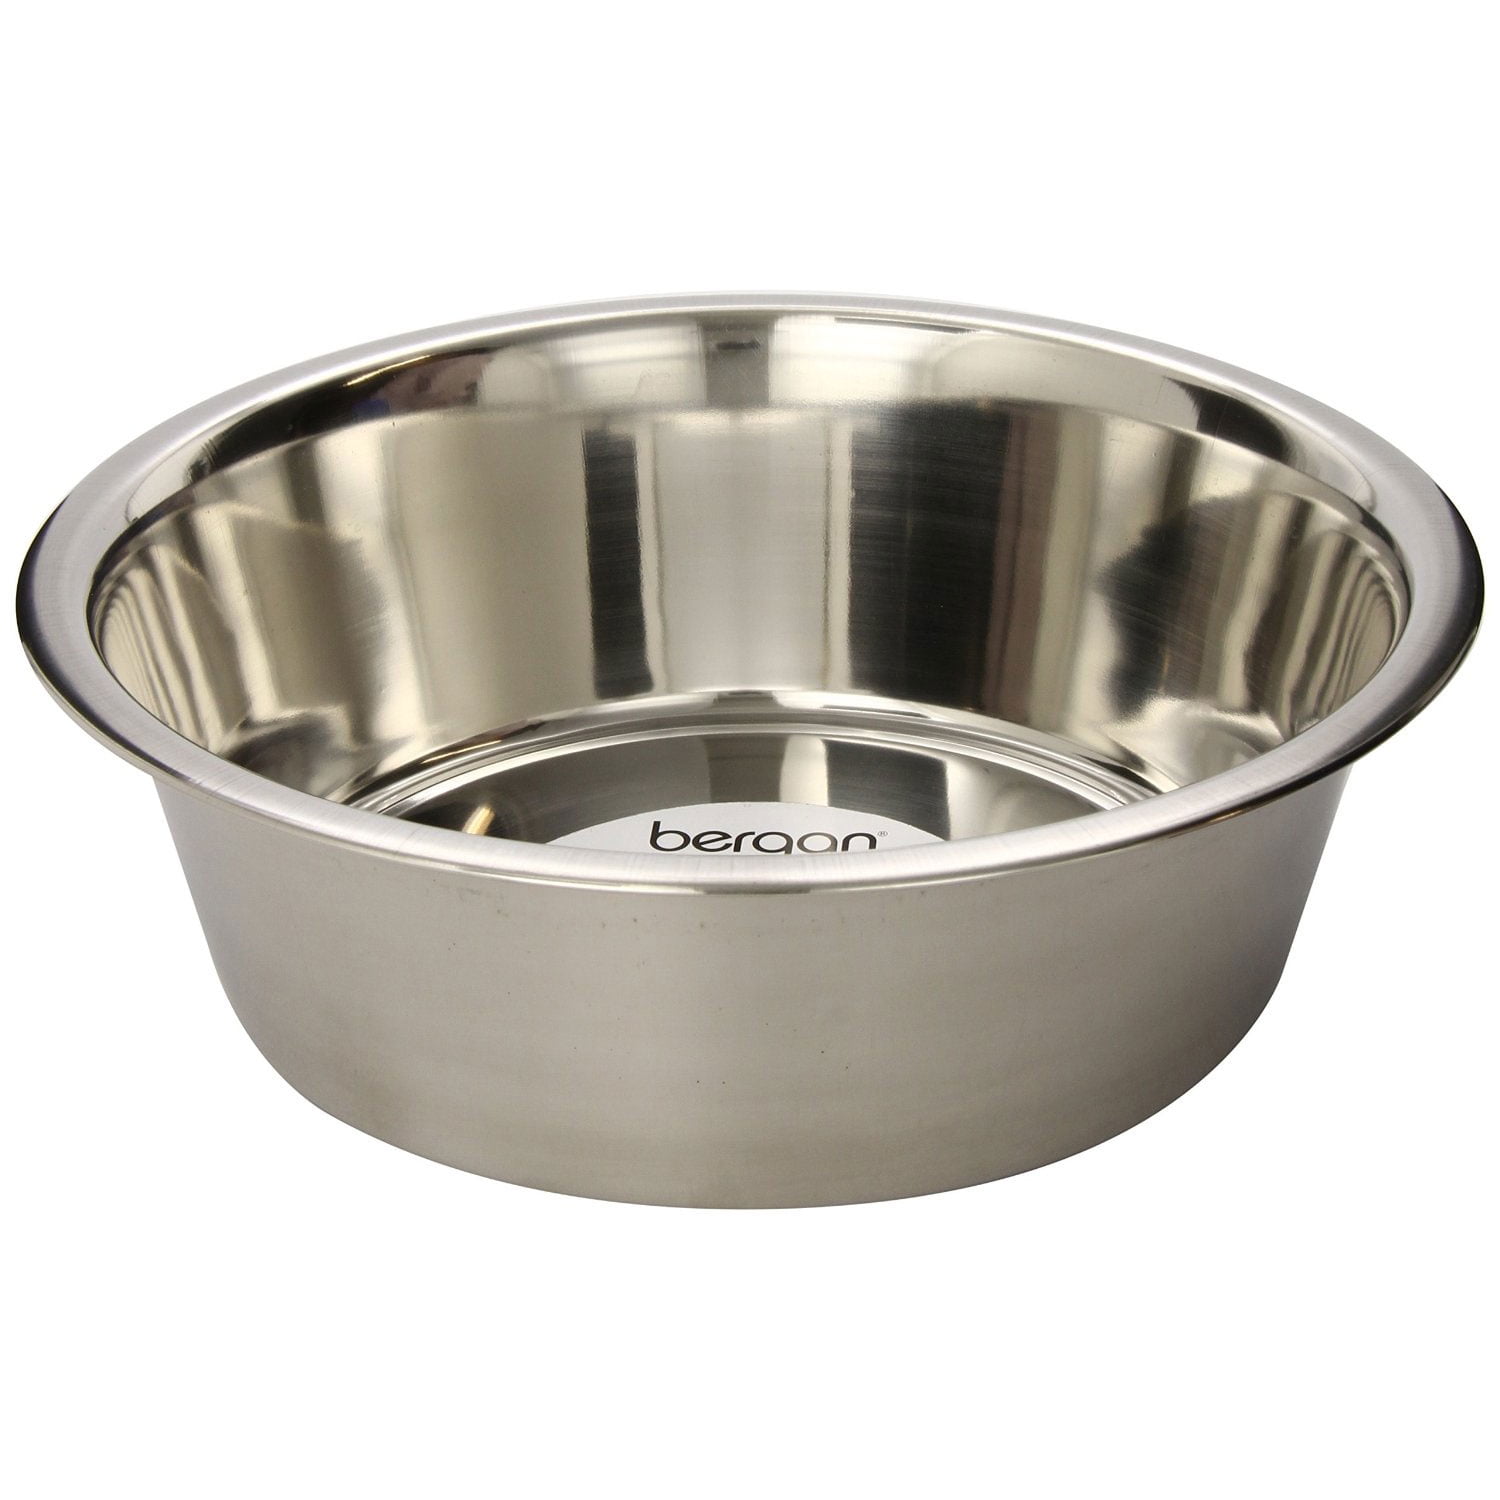 Bergan Stainless Steel Bowl 17 cups, Silver, 11.2